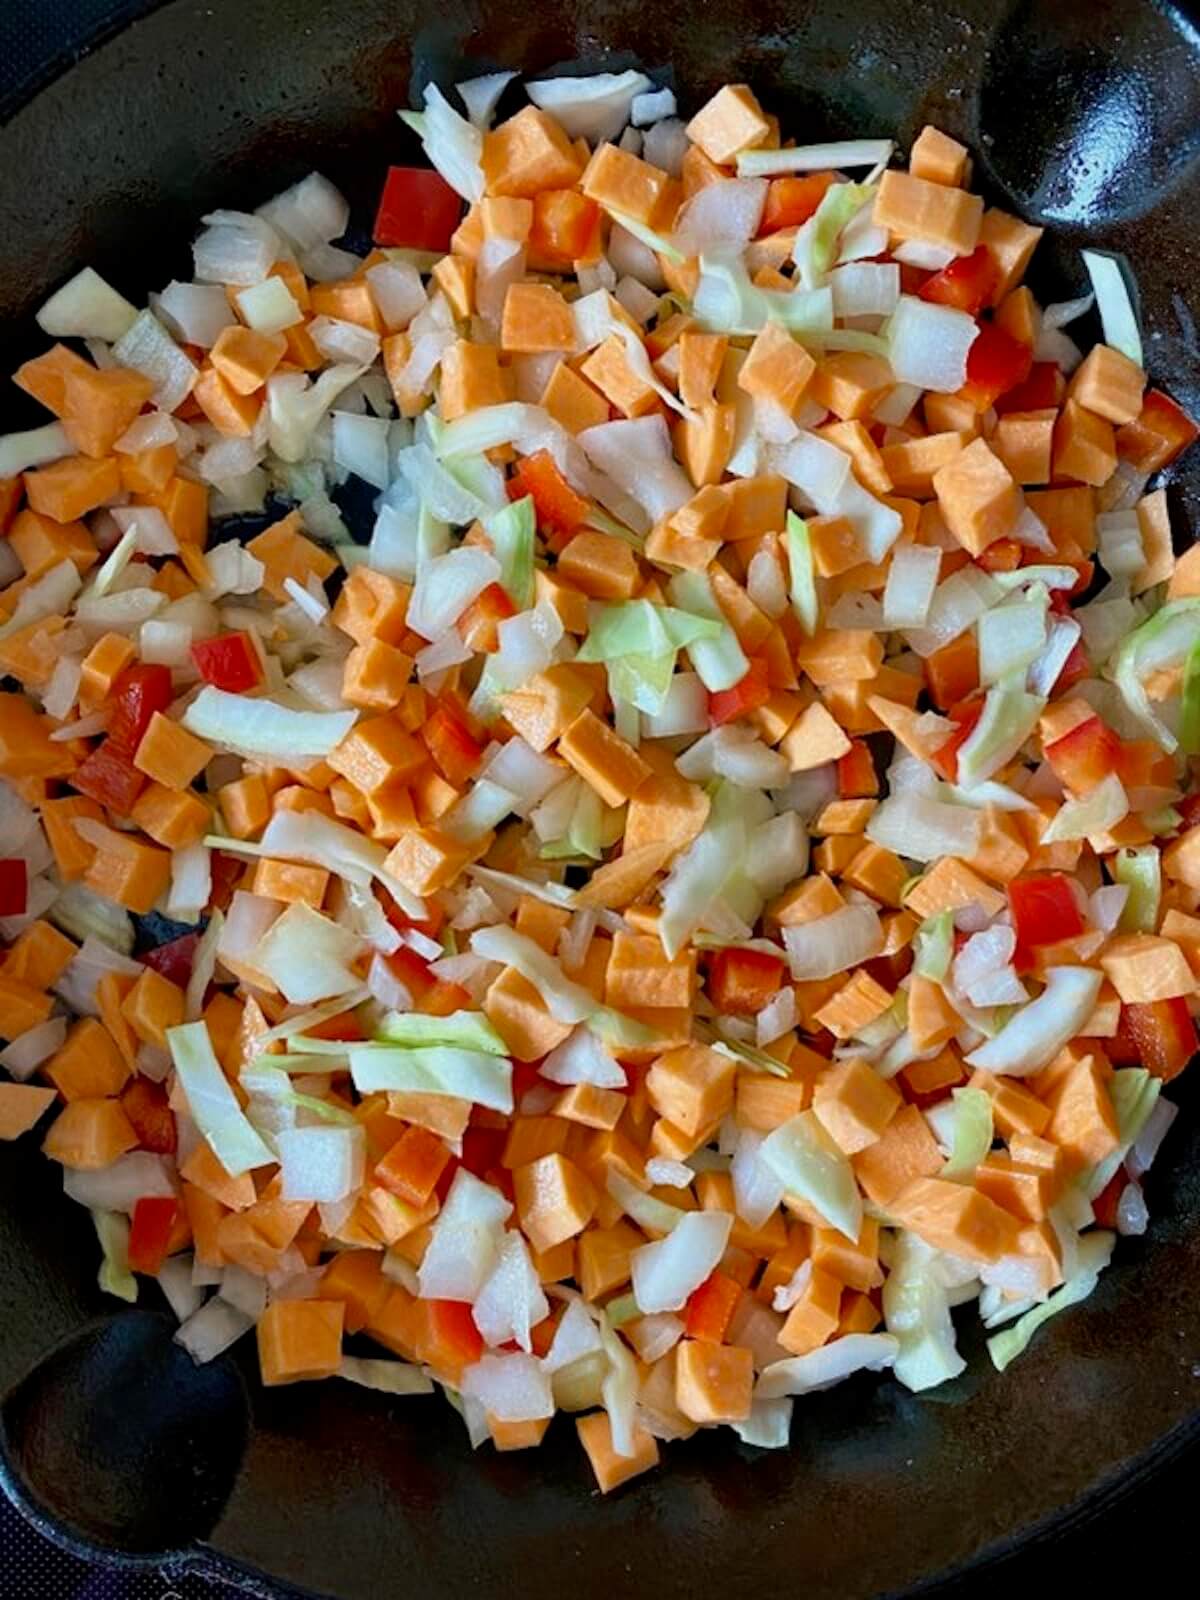 Diced sweet potato, red bell pepper, cabbage, and onion sautéing in a cast iron skillet.